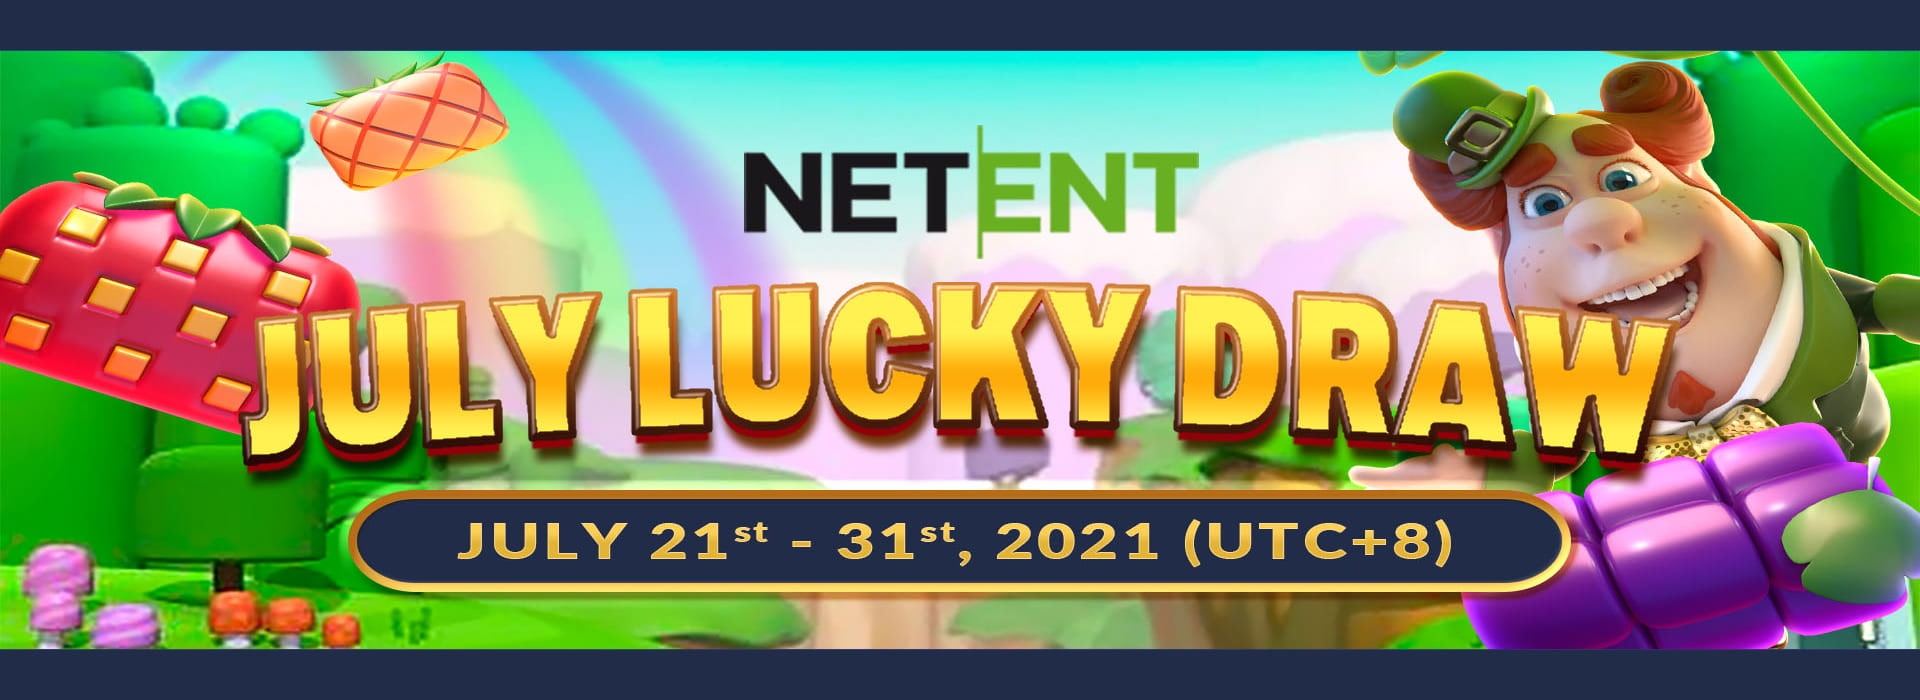 NETENT 2021 July Lucky Draw Campaign